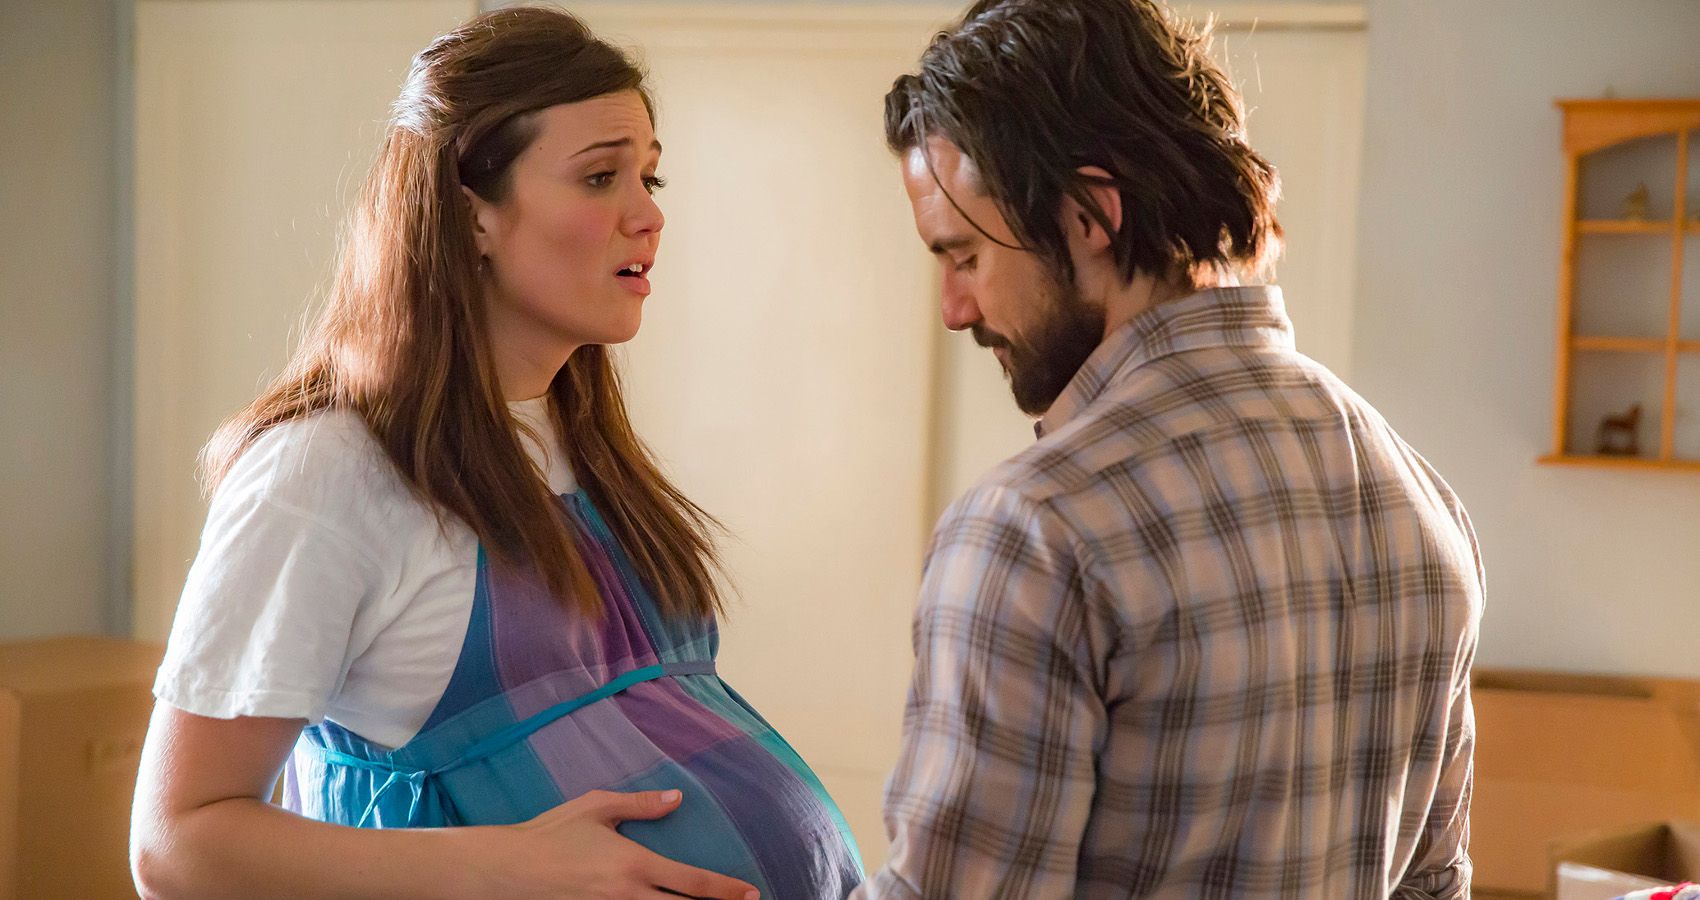 Mandy Moore has played a mom on TV and the experience may help her when she becomes a mom in real life.